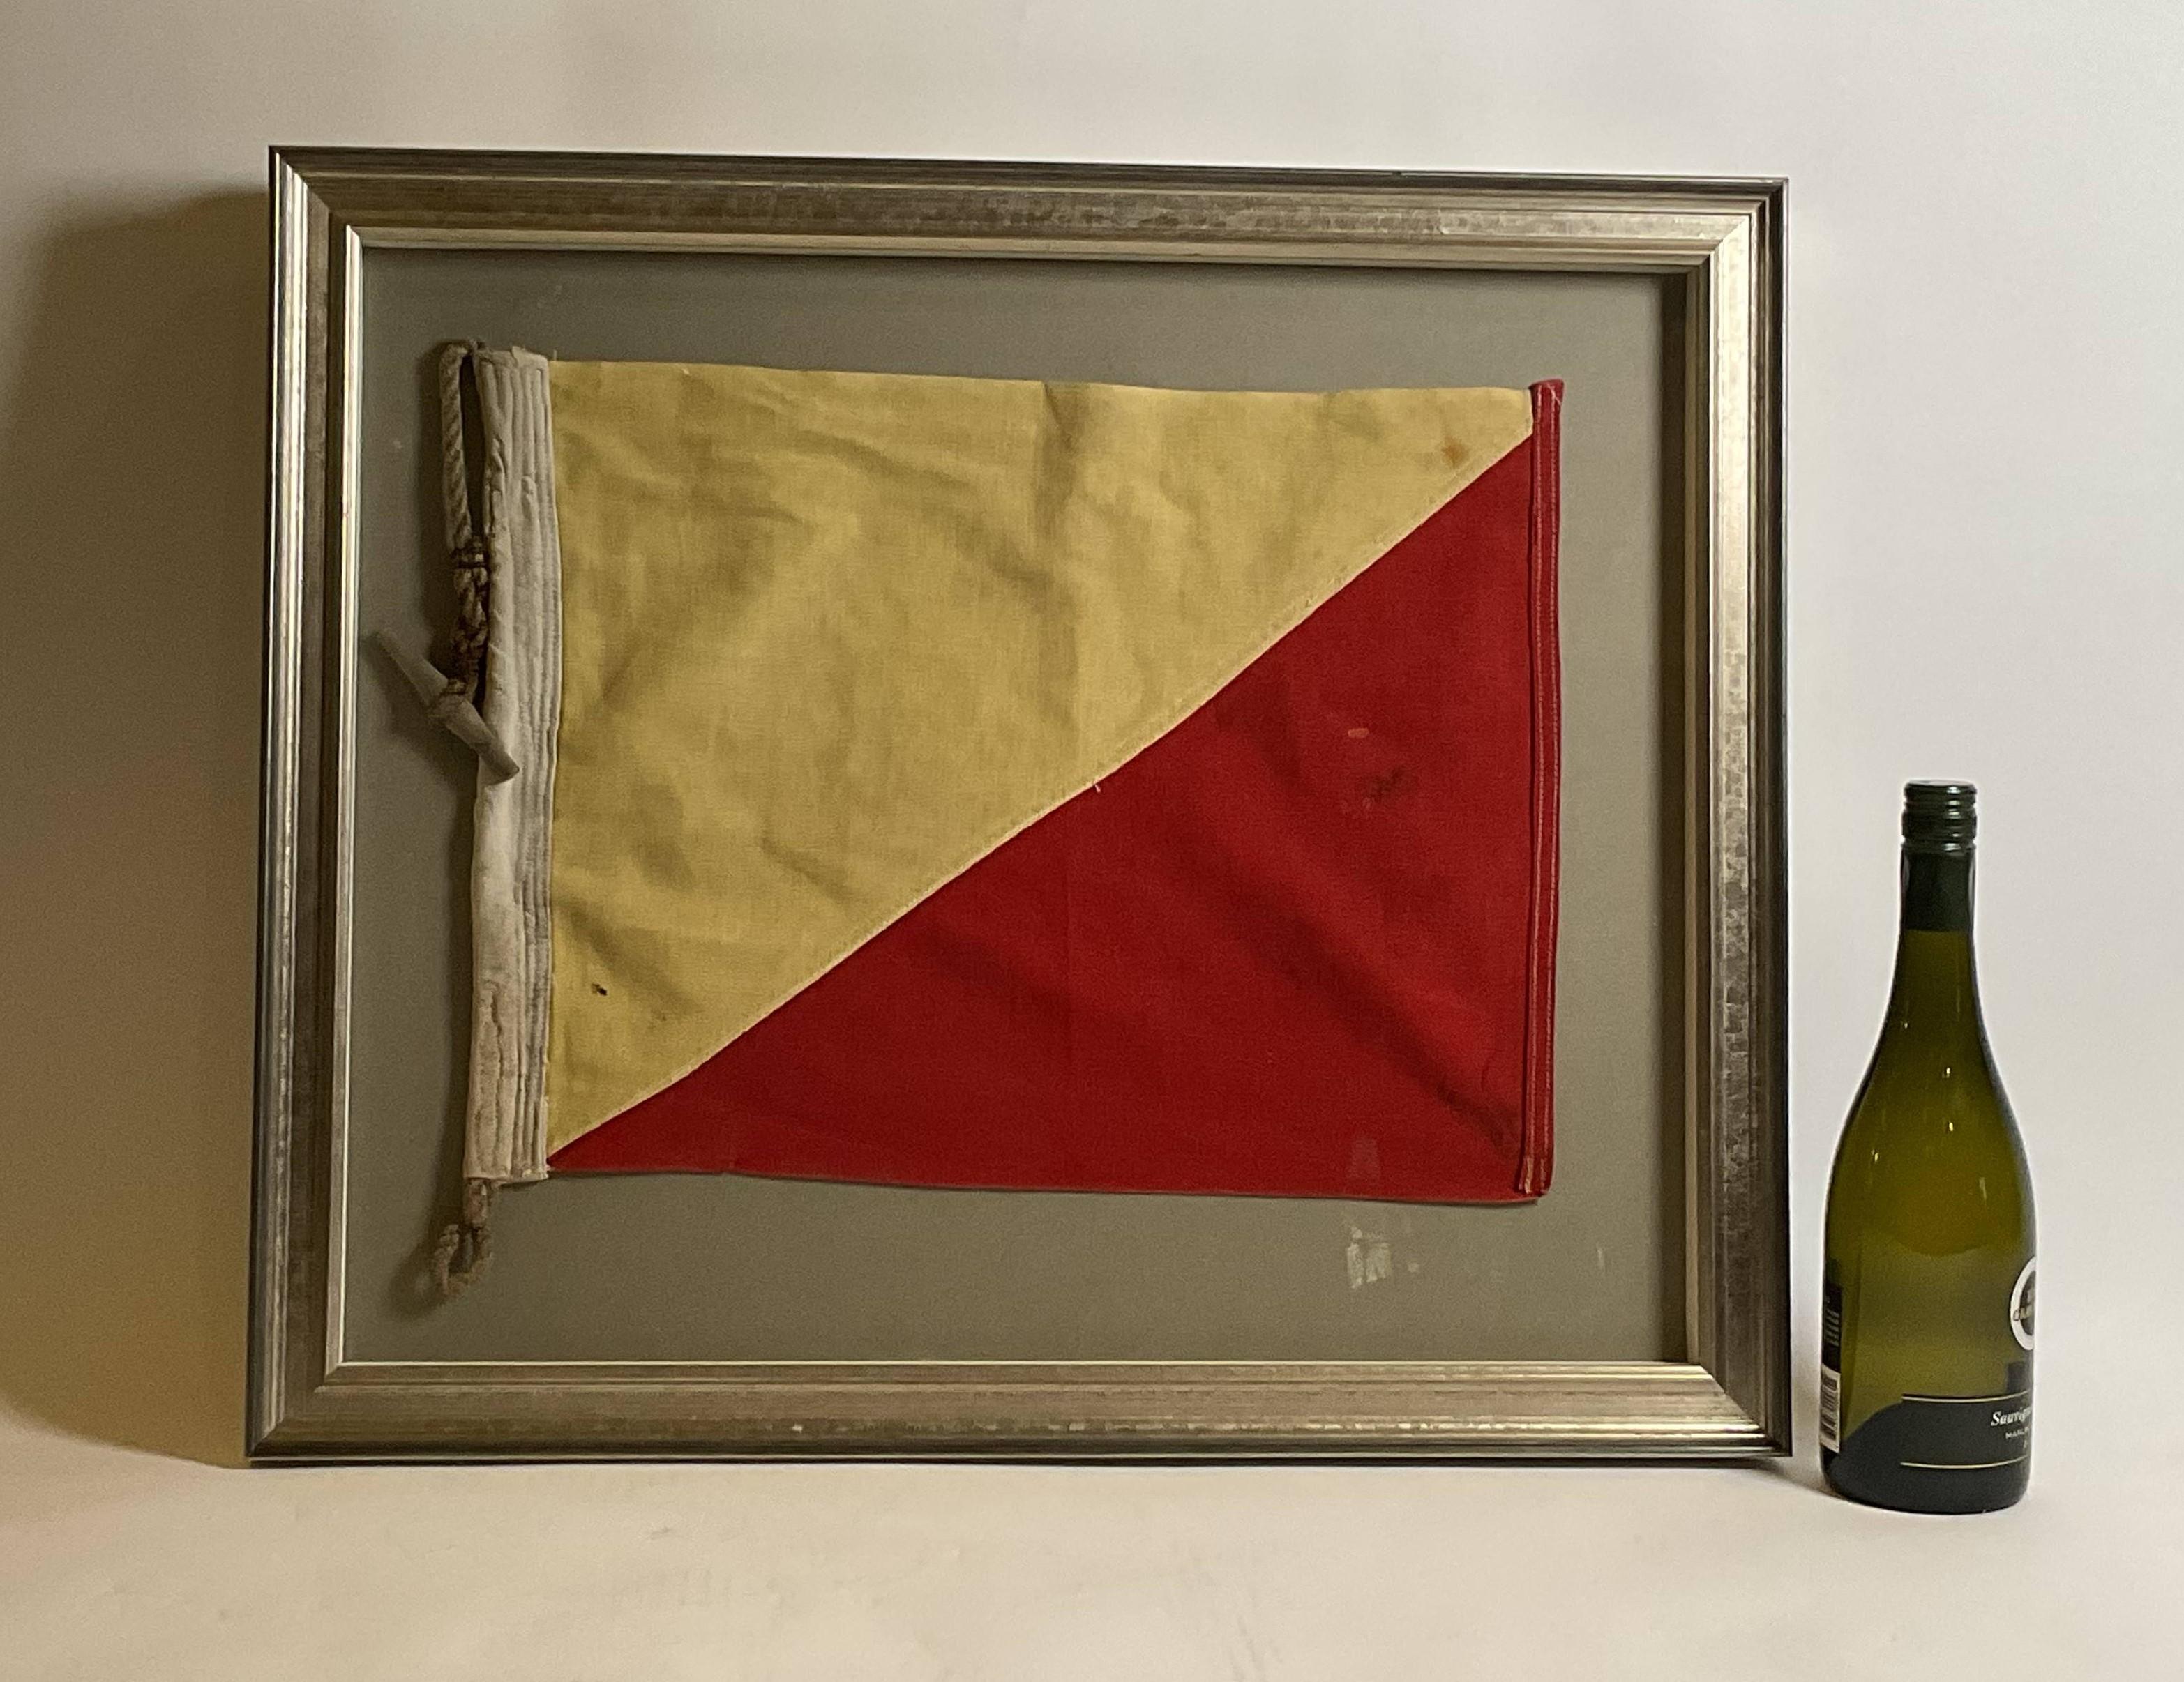 Maritime signal flag representing the letter “O”, oscar. The flag has red and yellow stitched panels with canvas hoist. Manila rope and wood toggle. Shadow box frame.

Weight: 8 lbs.
Overall Dimensions: 22